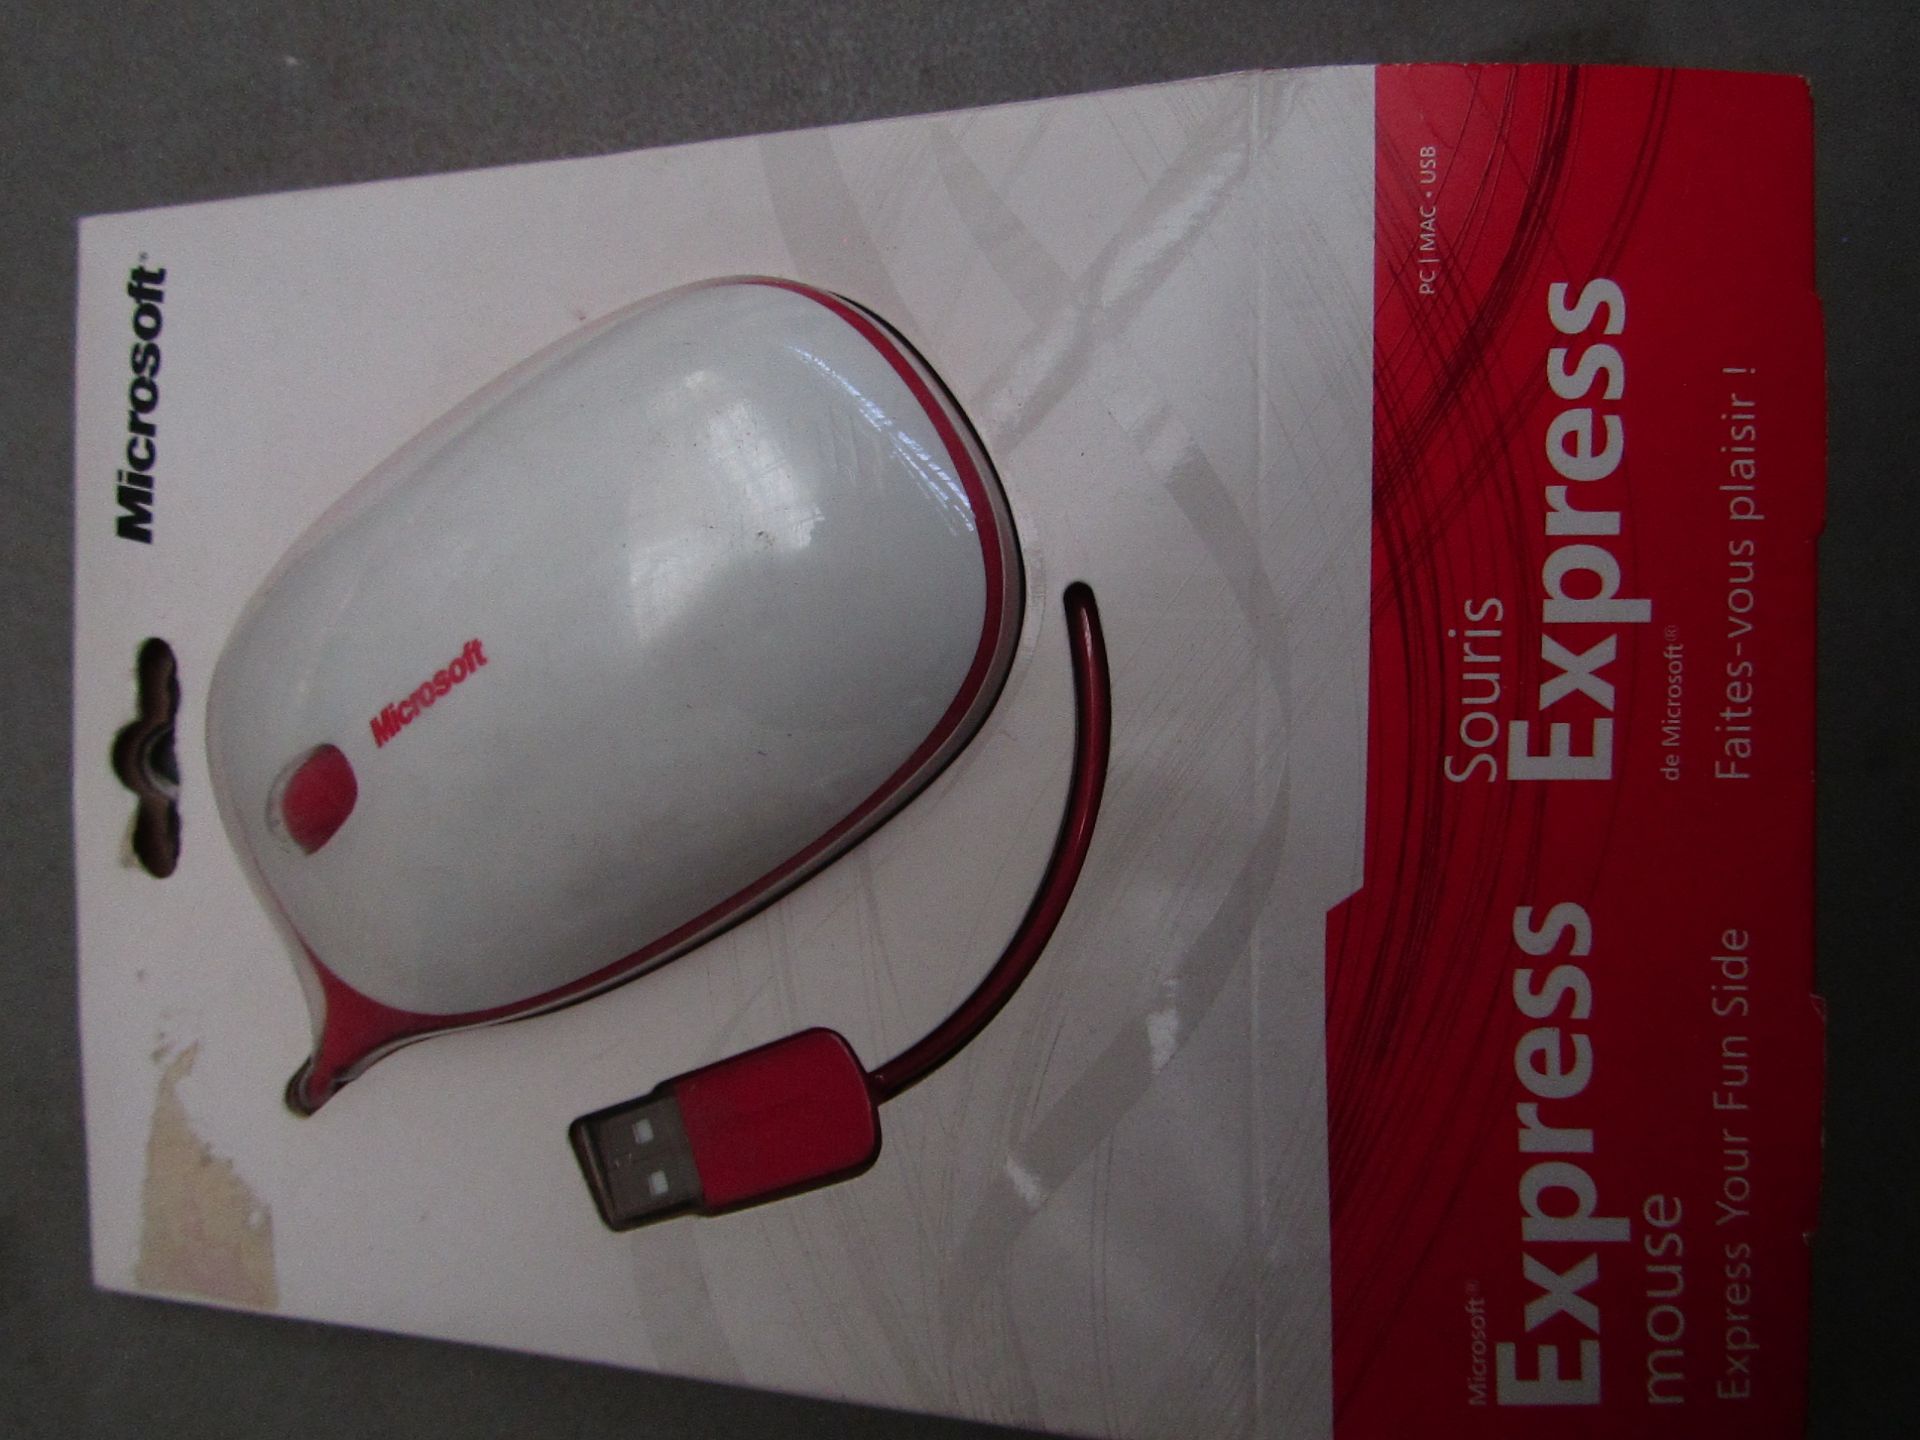 Microsoft Souris Express mouse, new and packaged.